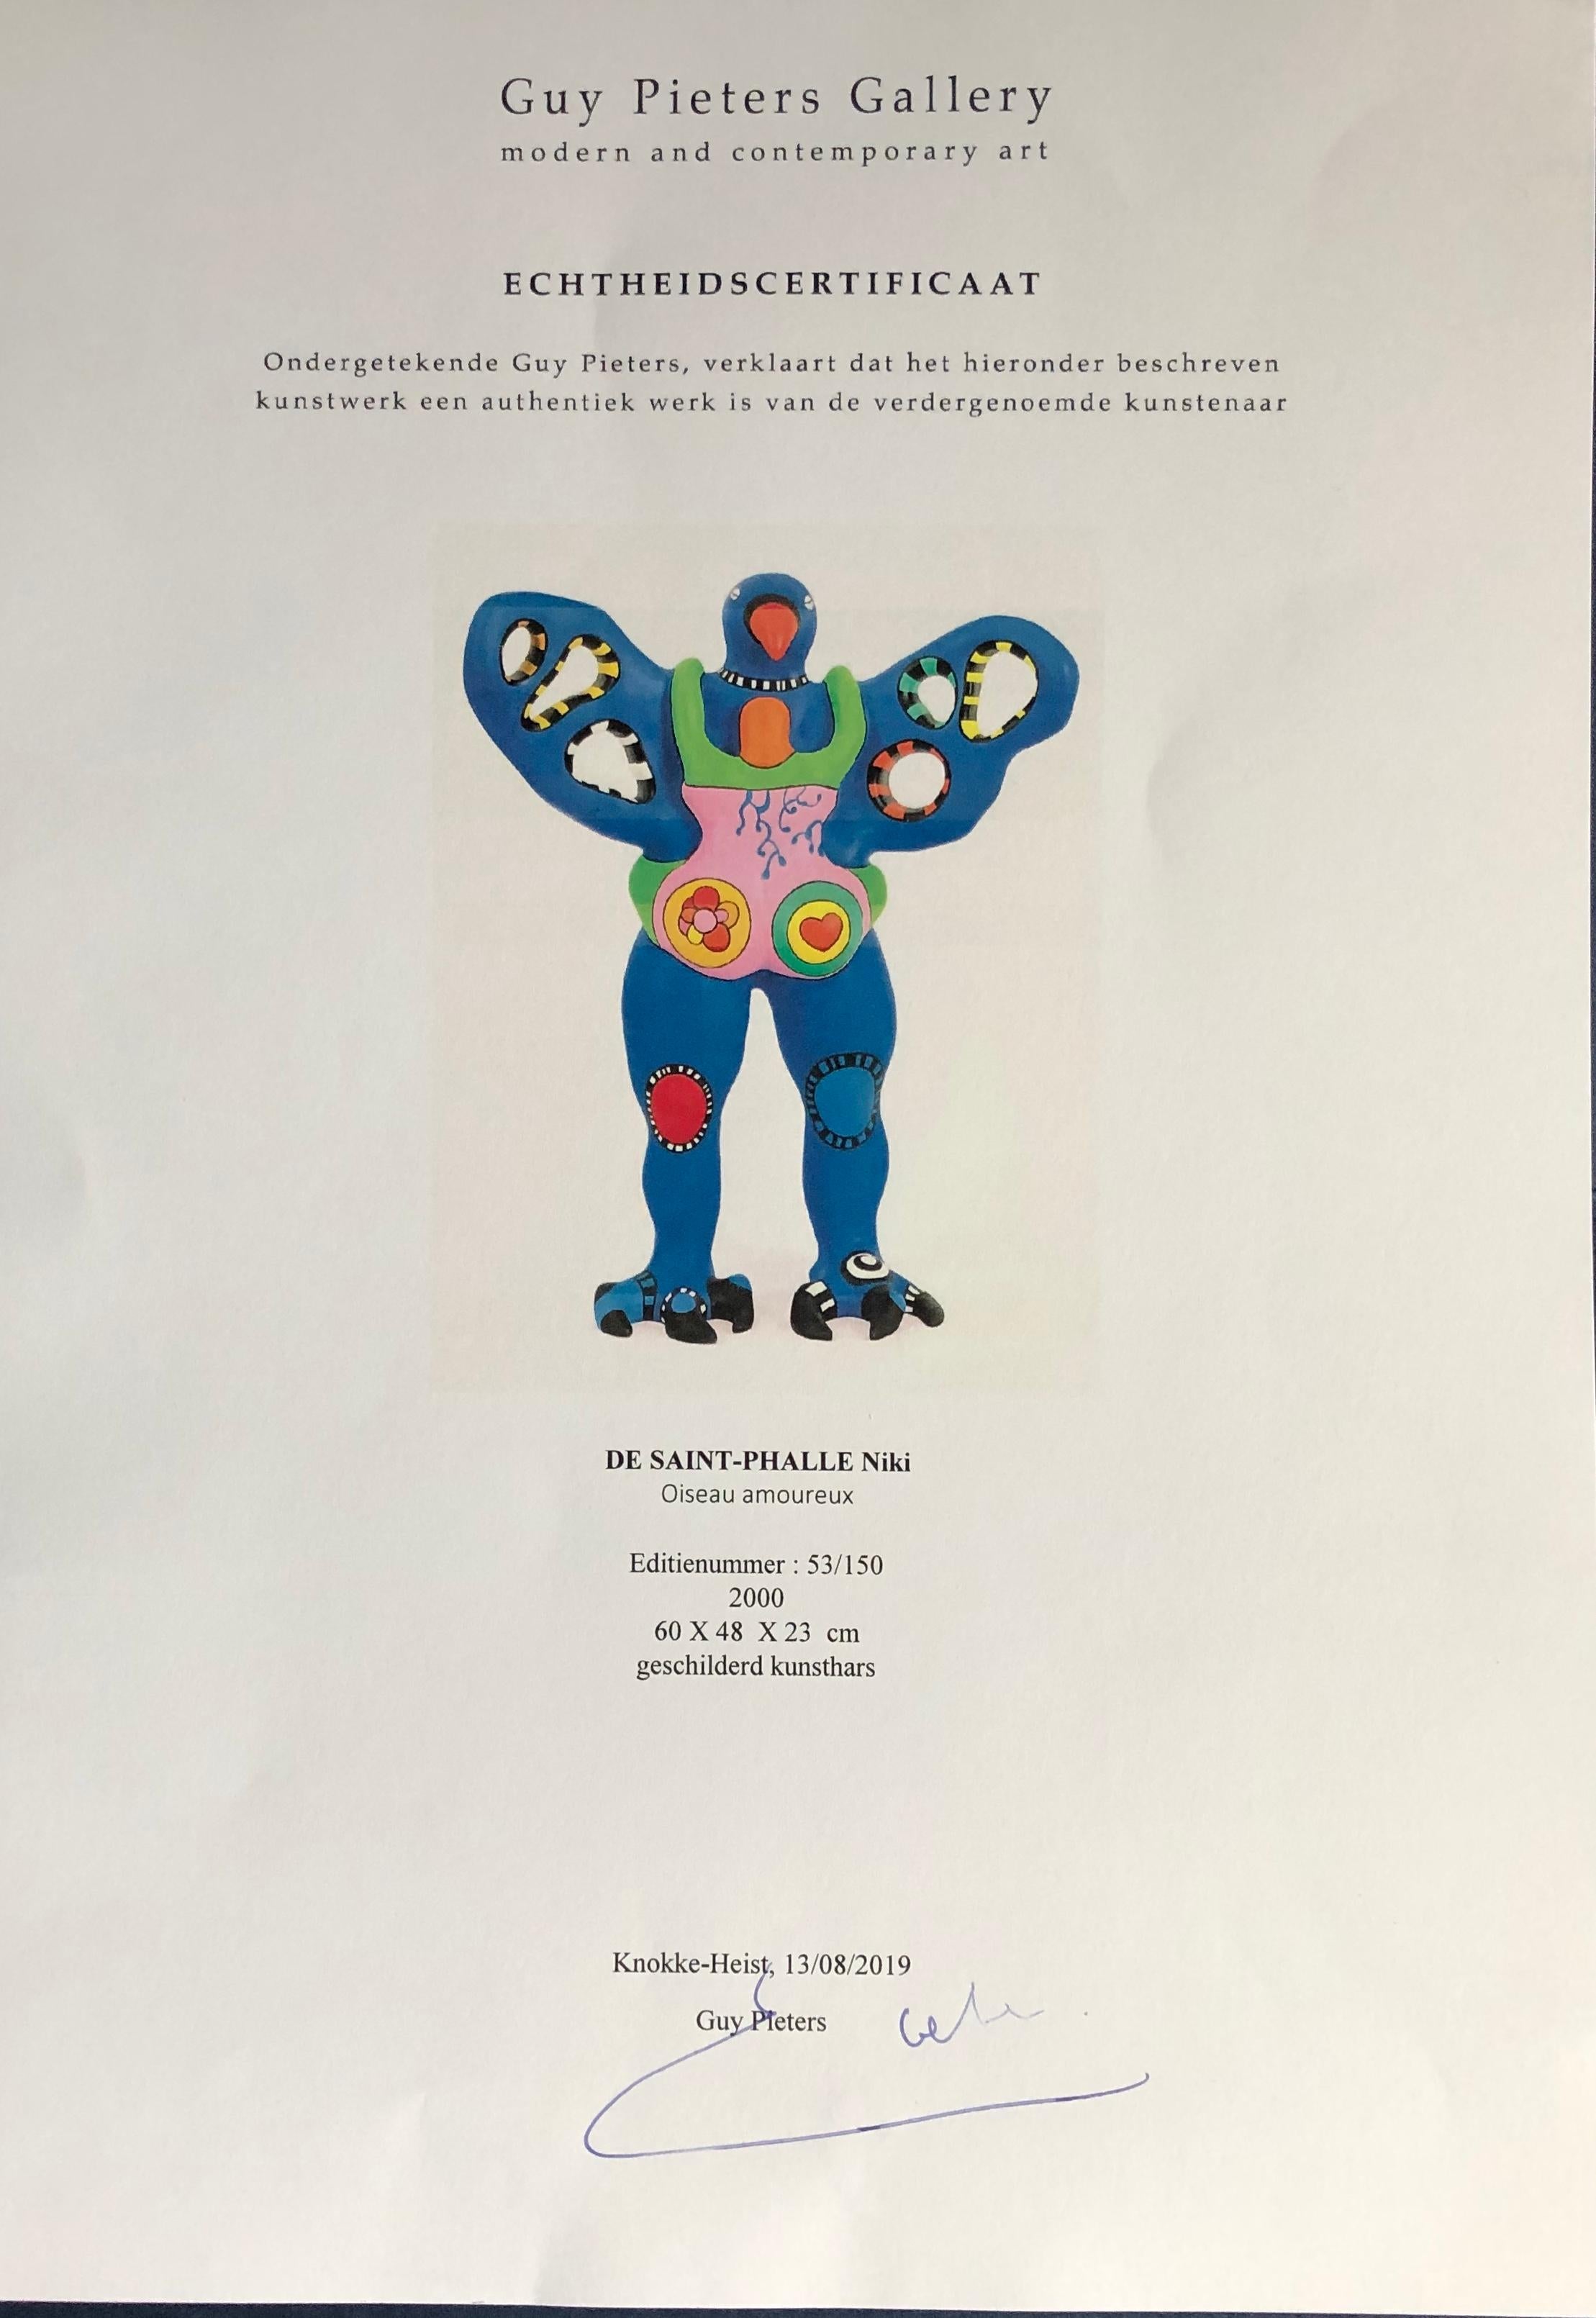 Niki de Saint Phalle (born Catherine-Marie-Agnès Fal de Saint Phalle, 29 October 1930 – 21 May 2002) was a French-American sculptor, painter, and filmmaker. Widely noted as one of the few female monumental sculptors, de Saint Phalle was also known